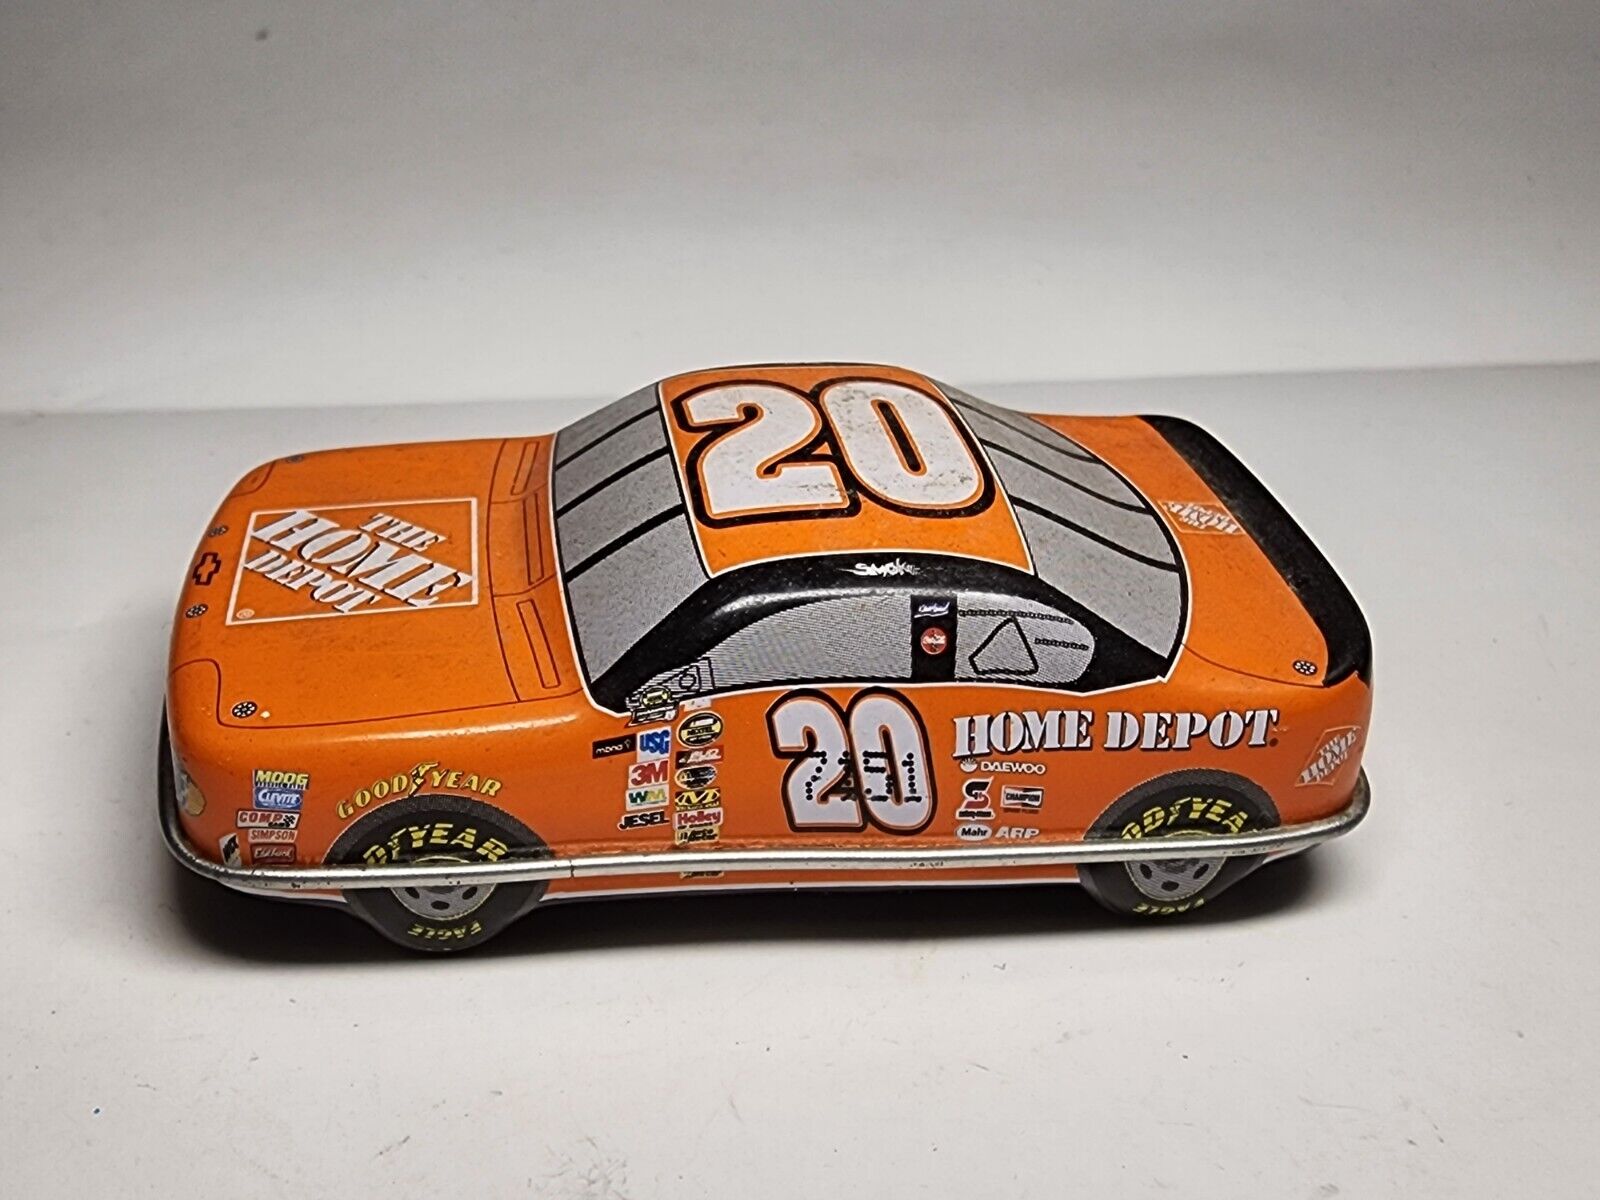 Vintage 2003 Home Depot NASCAR Aluminum mint Tony Stewart candy canister Car can